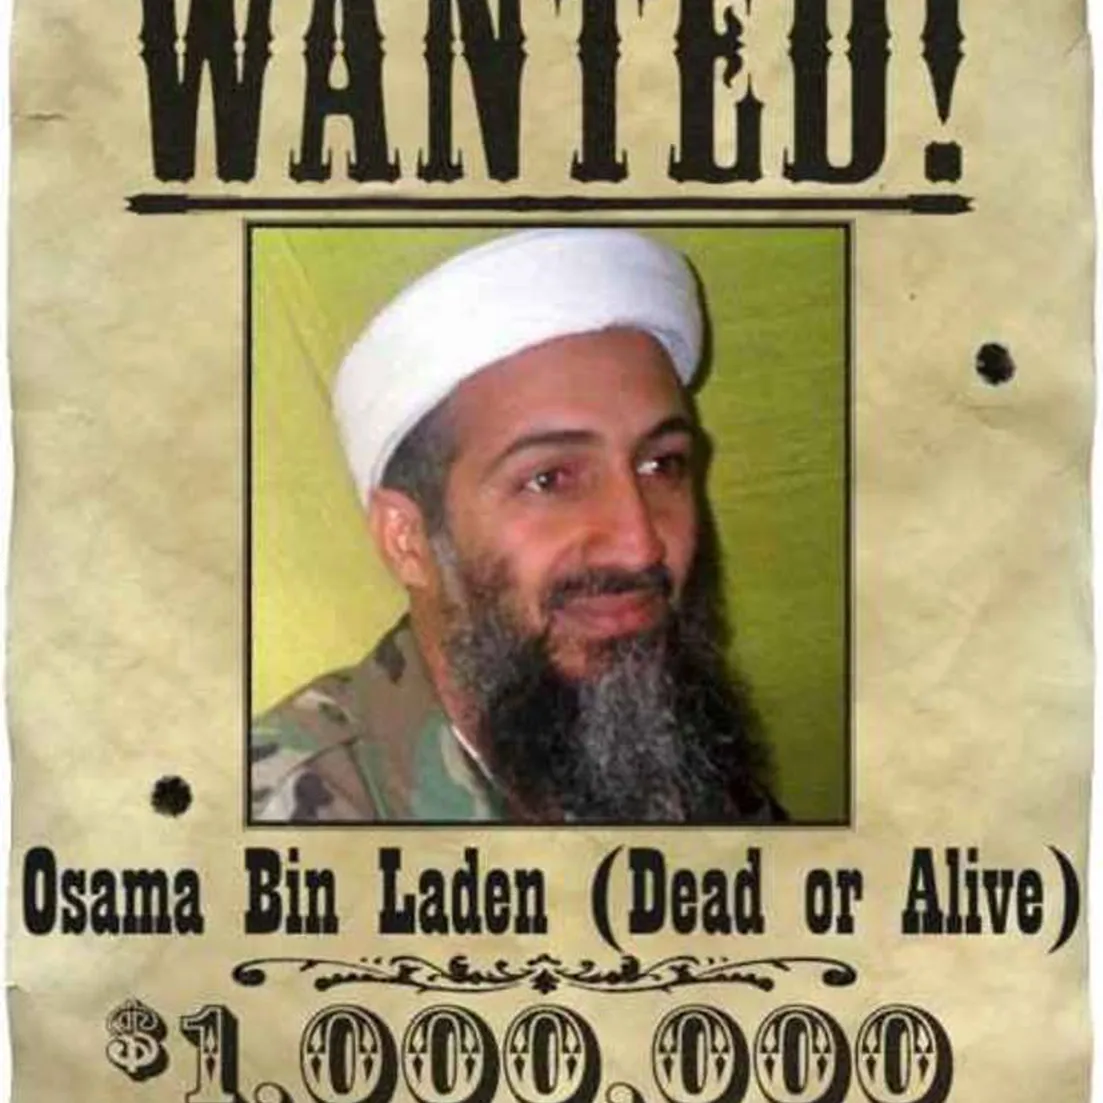 Osama Bin Laden: 2001-2010 Current Hide and Seek World Champion Tour Dates, Concert Tickets, & Streams